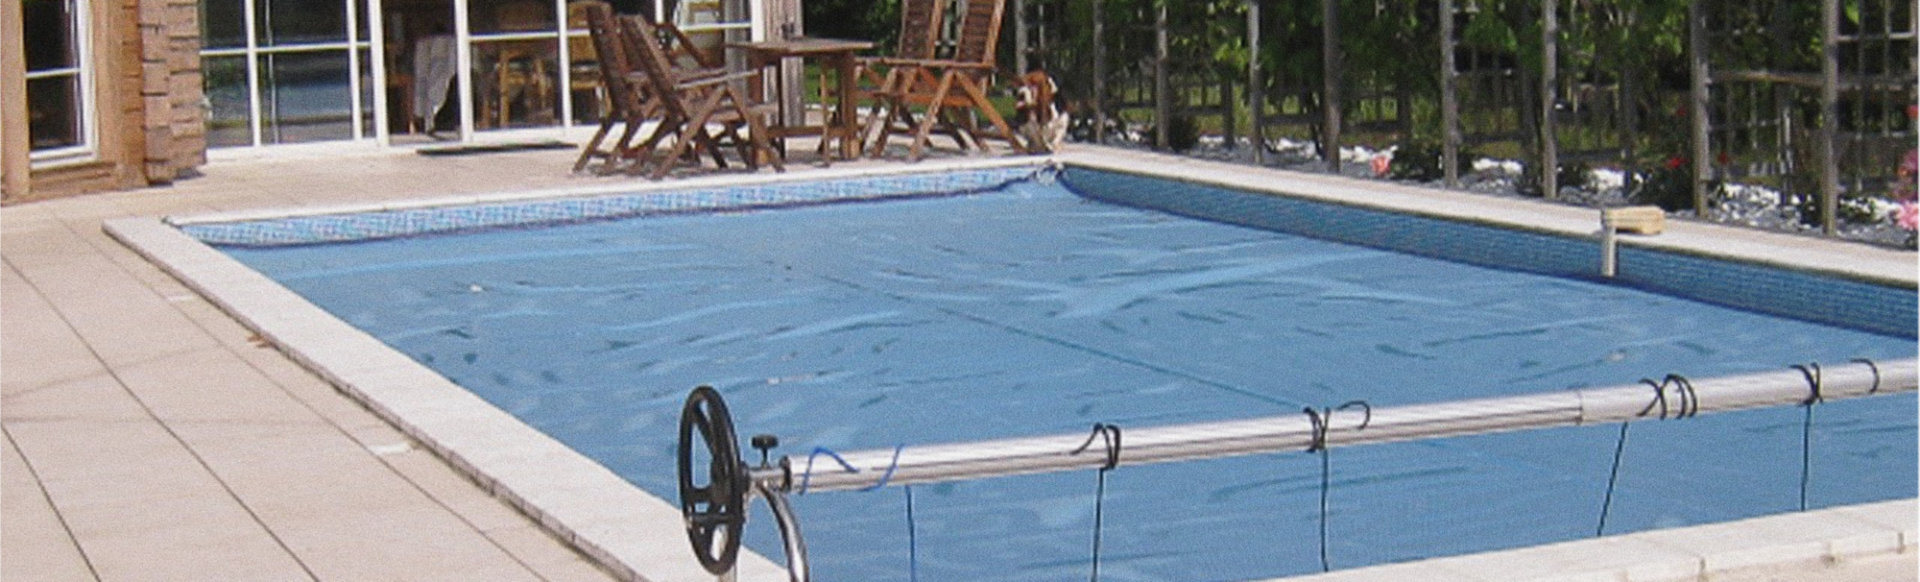 sol+guard pool cover on swimming pool